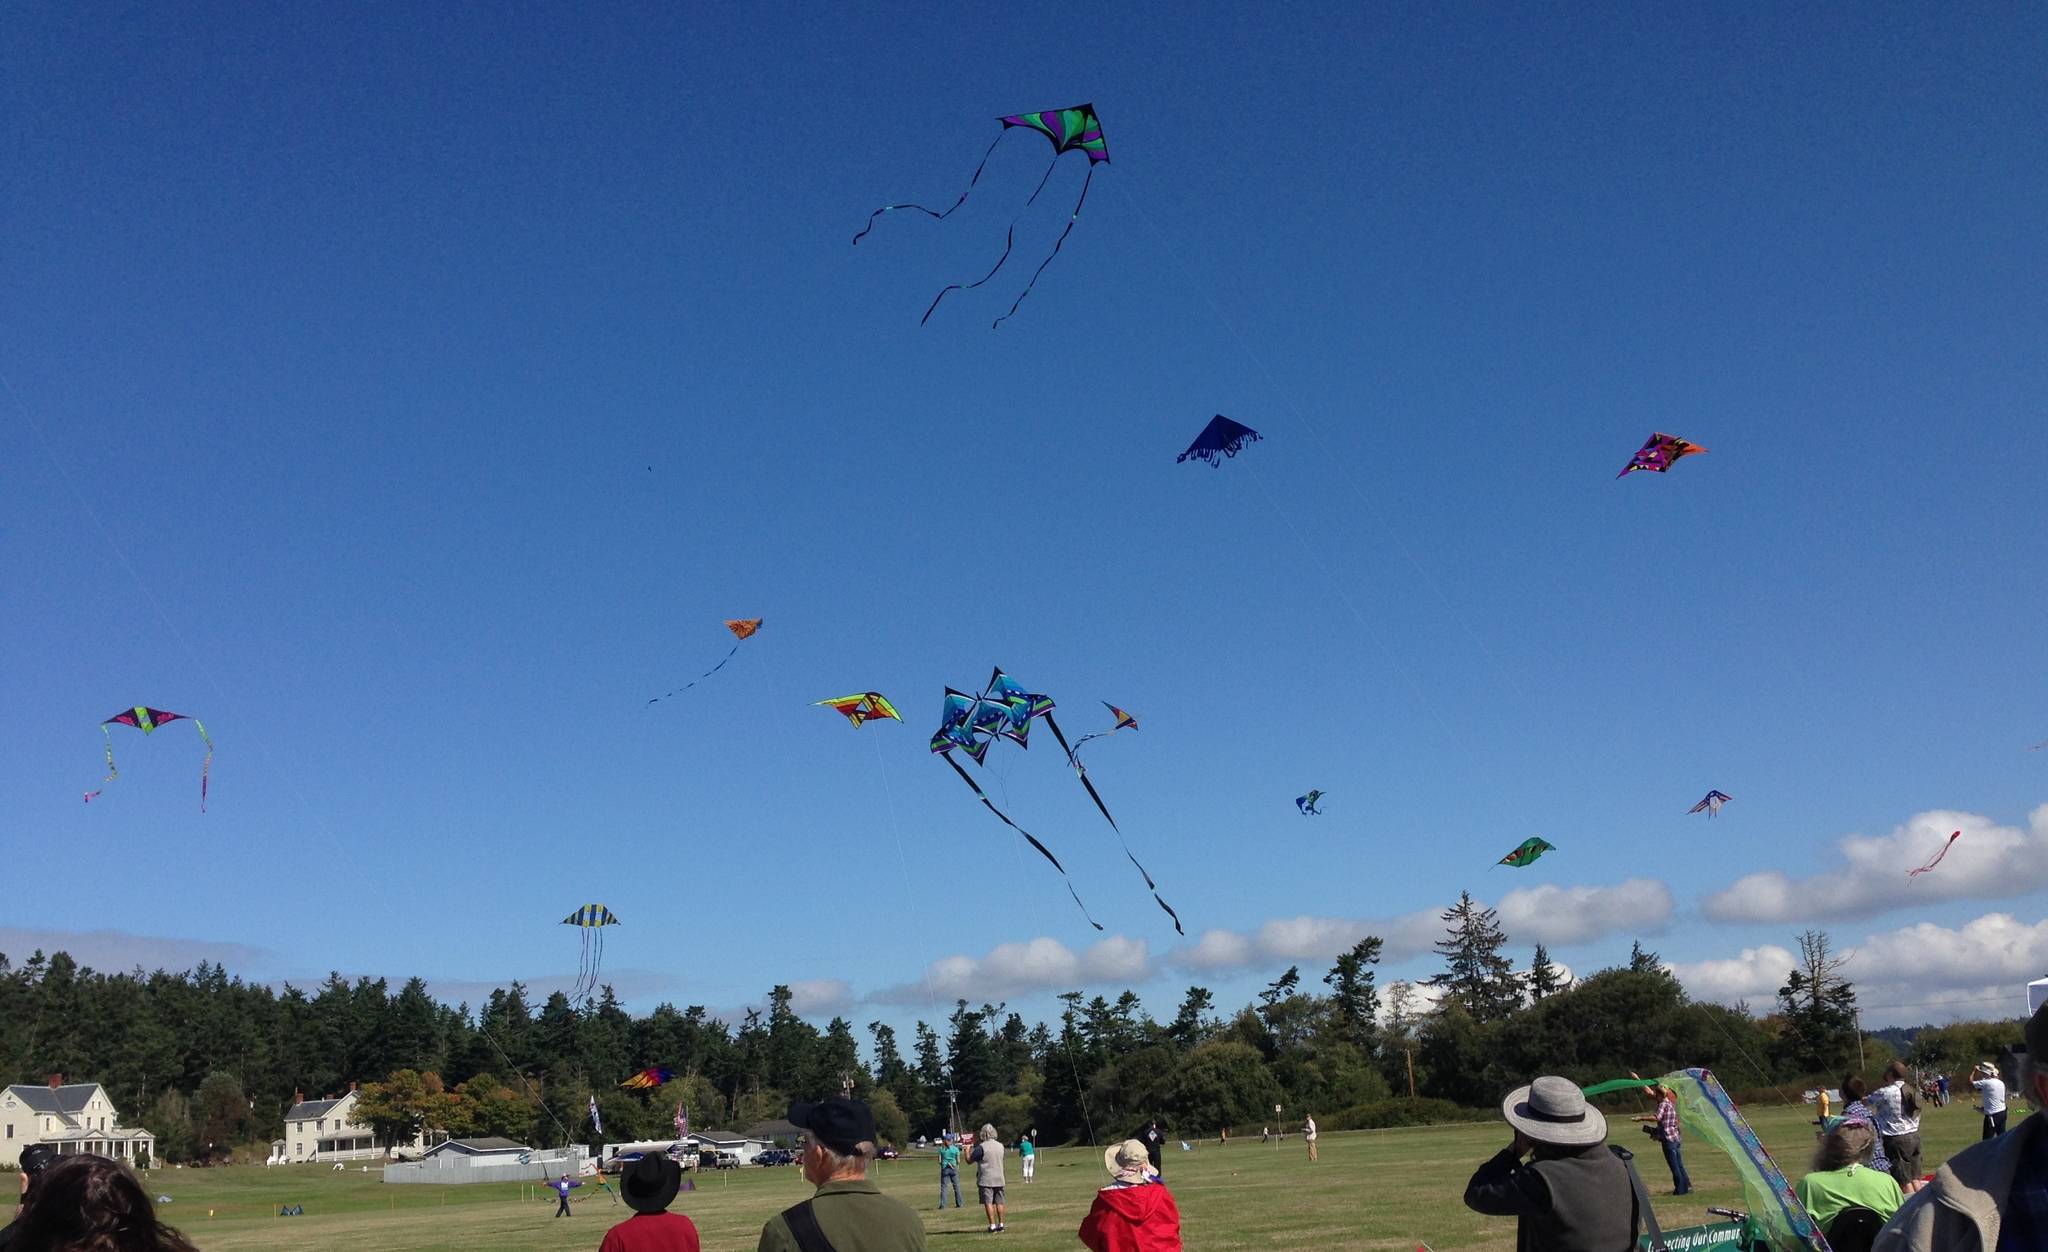 Kite fliers gather for the Whidbey Island Kite Festival in 2019. The Festival is one of many end-of-summer events happening on Whidbey Island. (Photo courtesy of Whidbey Island Kite Festival)